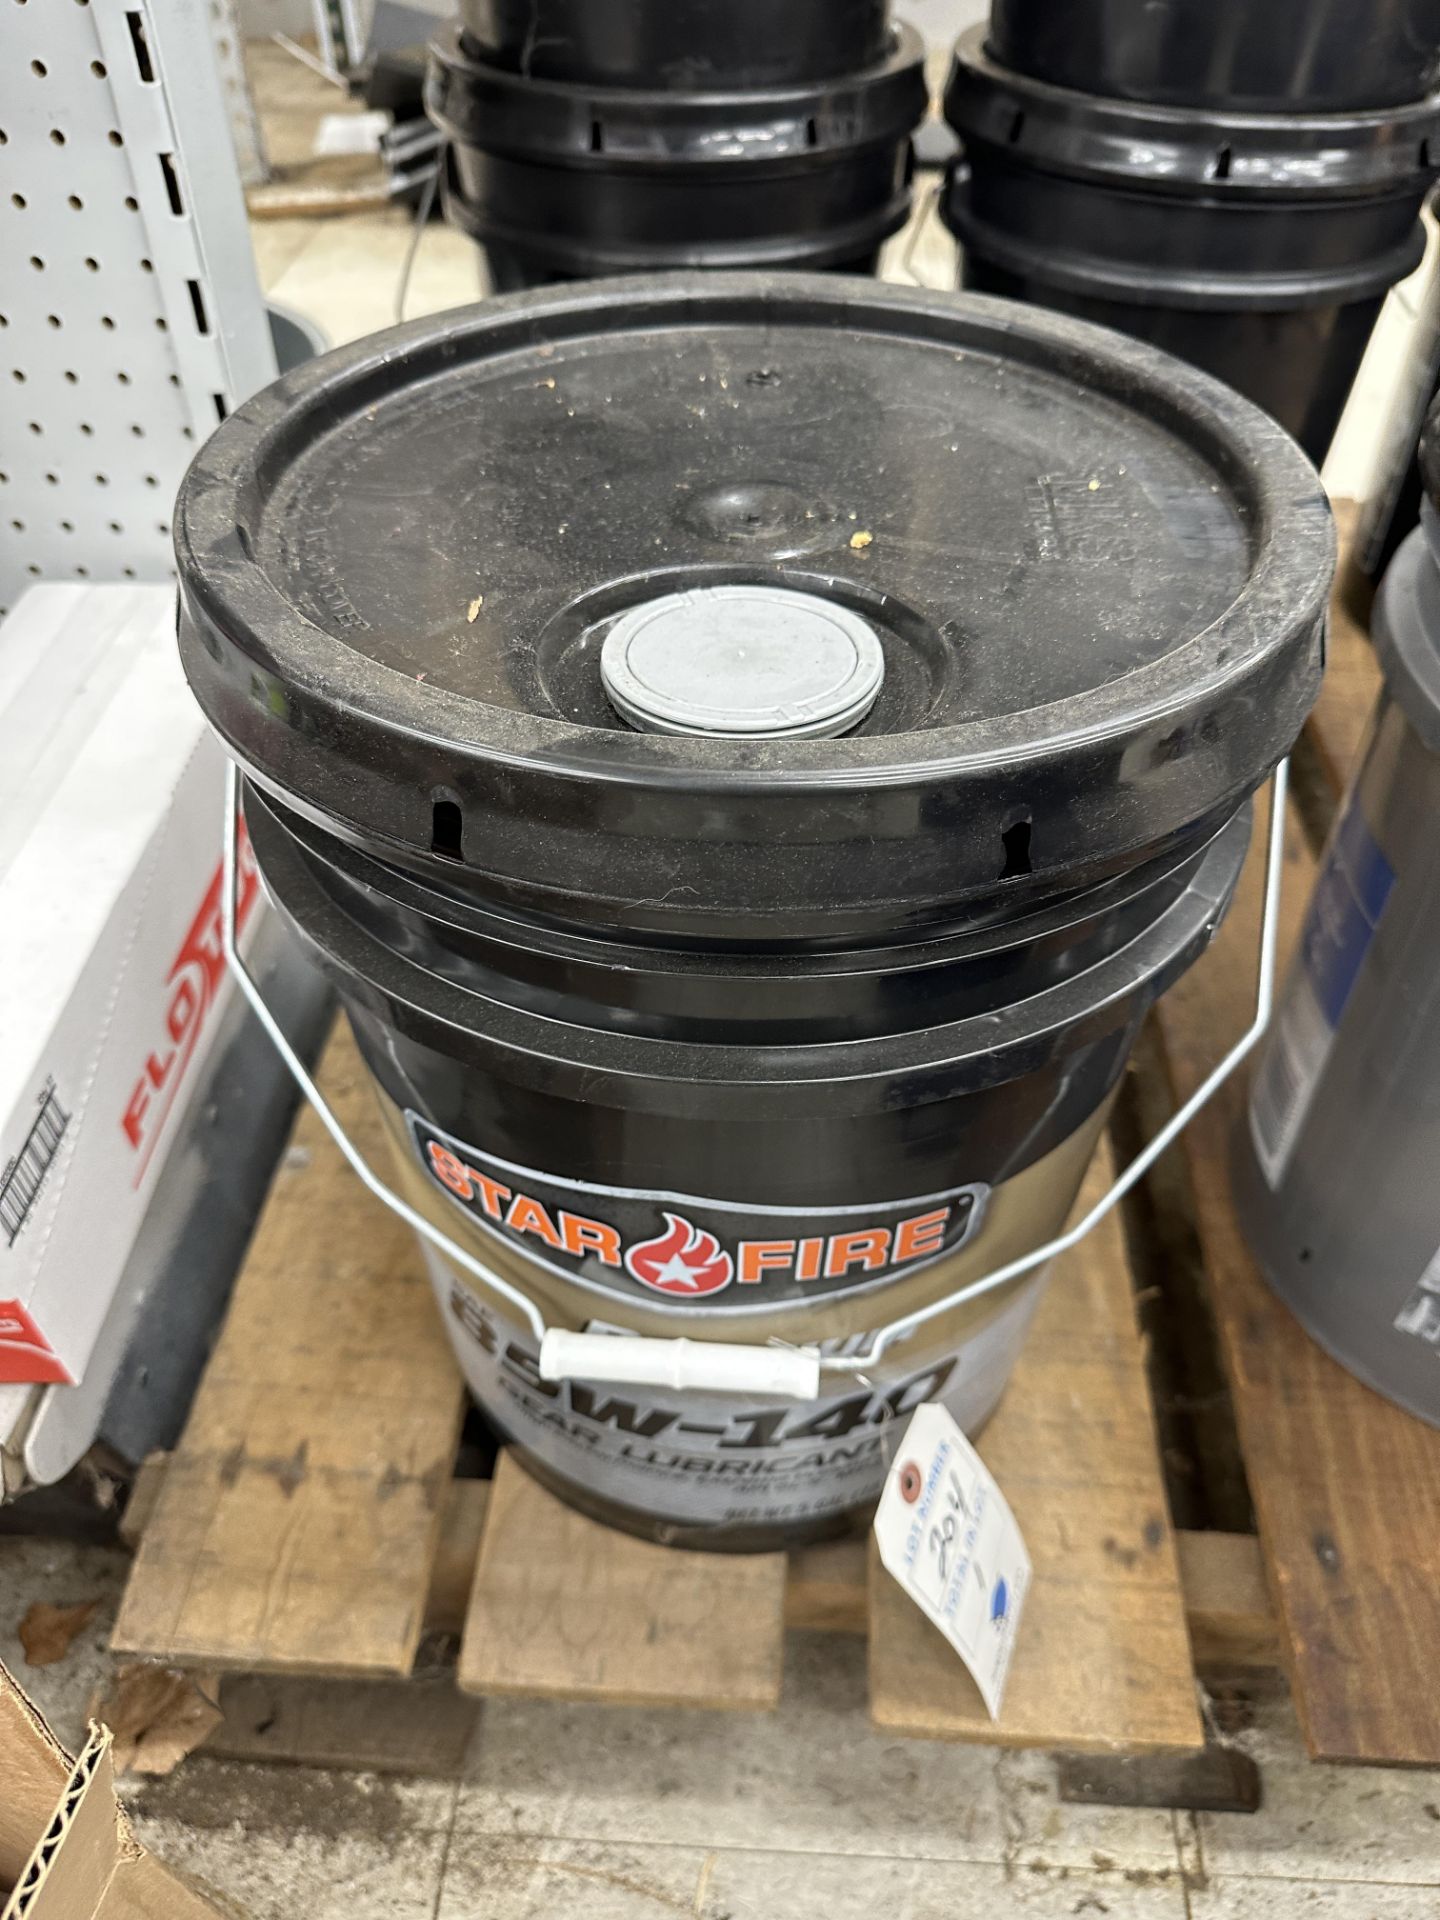 Star Fire 5 Gallon Pail 85-140 Gear Lubricant Fluid Being Sold by The Pail (Retail: $100) - Image 2 of 2